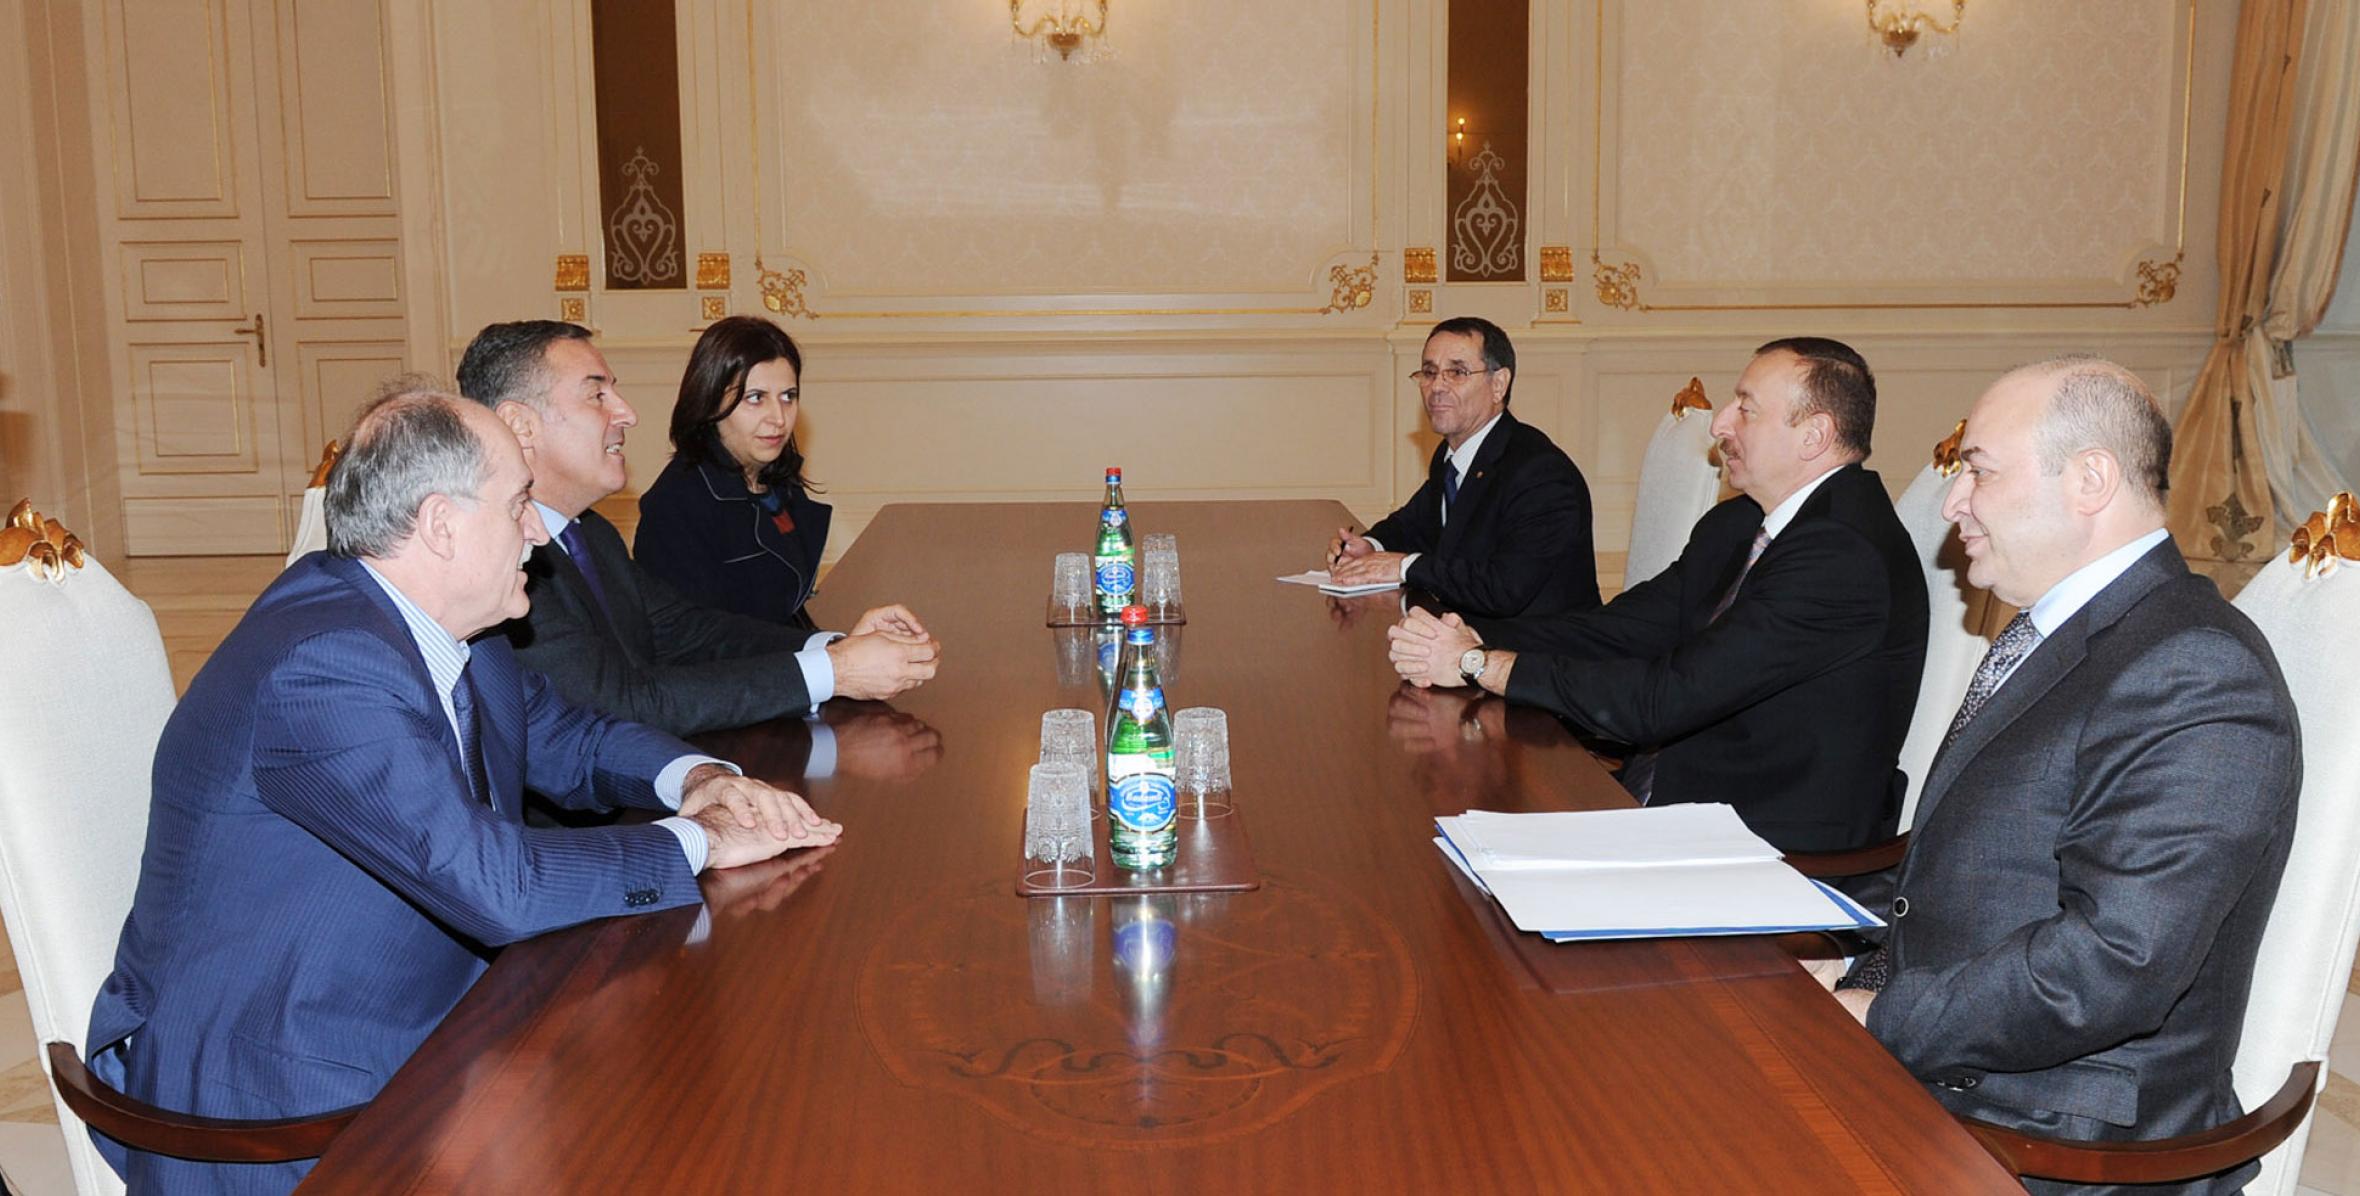 Ilham Aliyev received the former president and prime minister of Montenegro